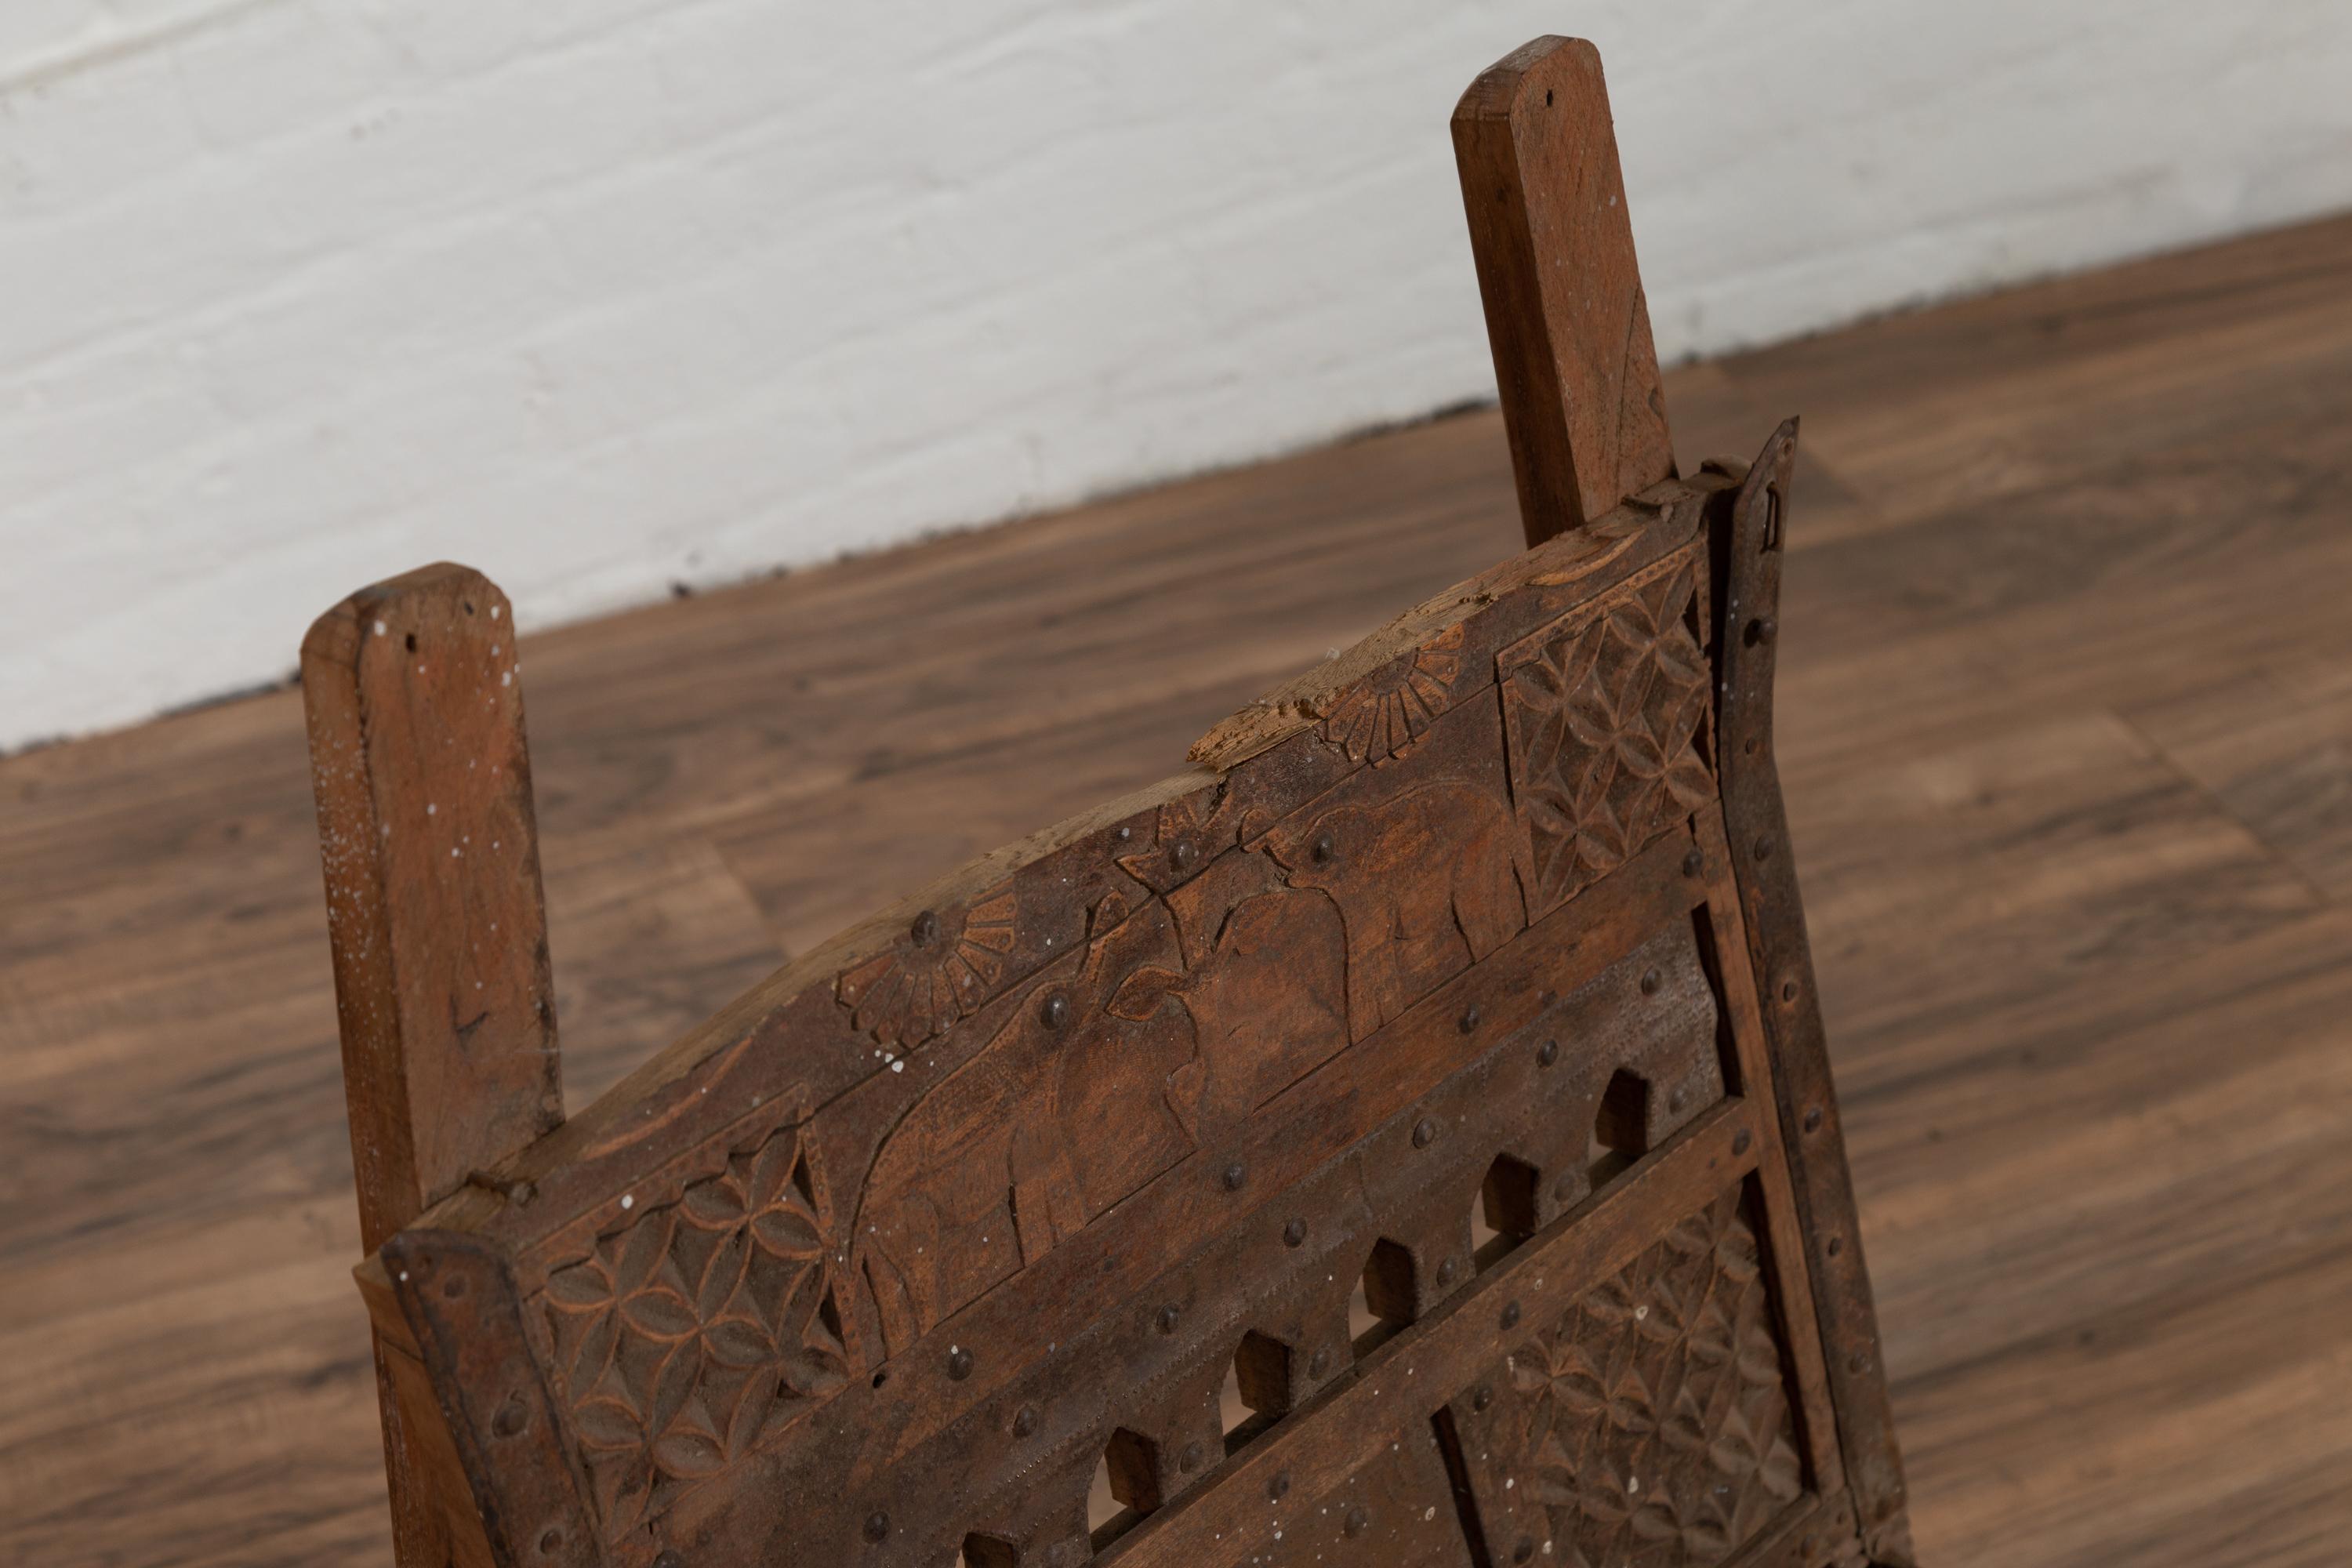 19th Century Rustic Indian Low Wooden Chair with Rope Seat and Weathered Appearance For Sale